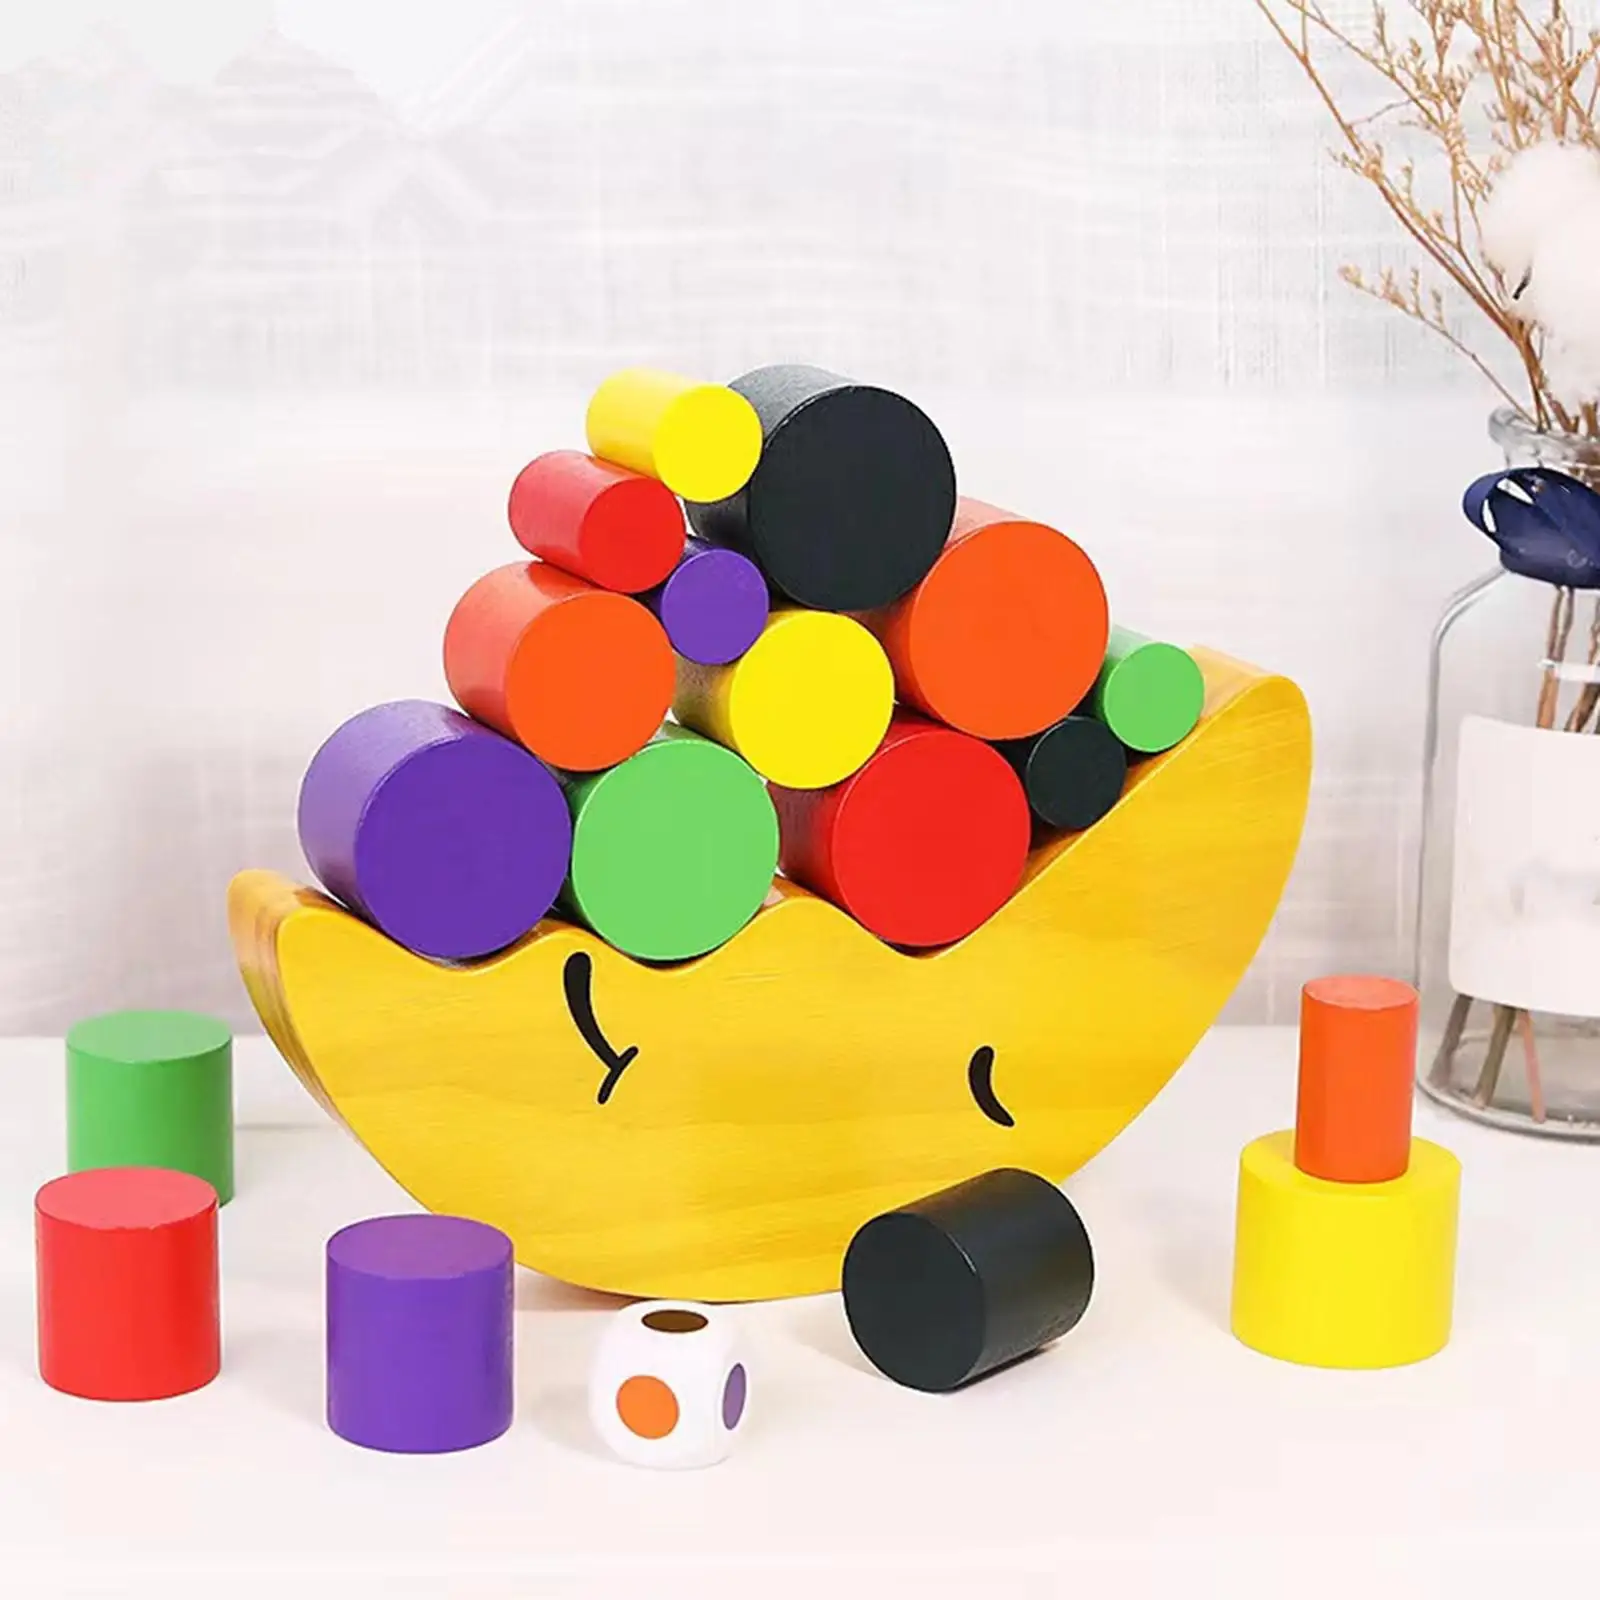 Toy Wooden Blocks Early Childhood Wooden Blocks Balancing Game Sorting Toy Table